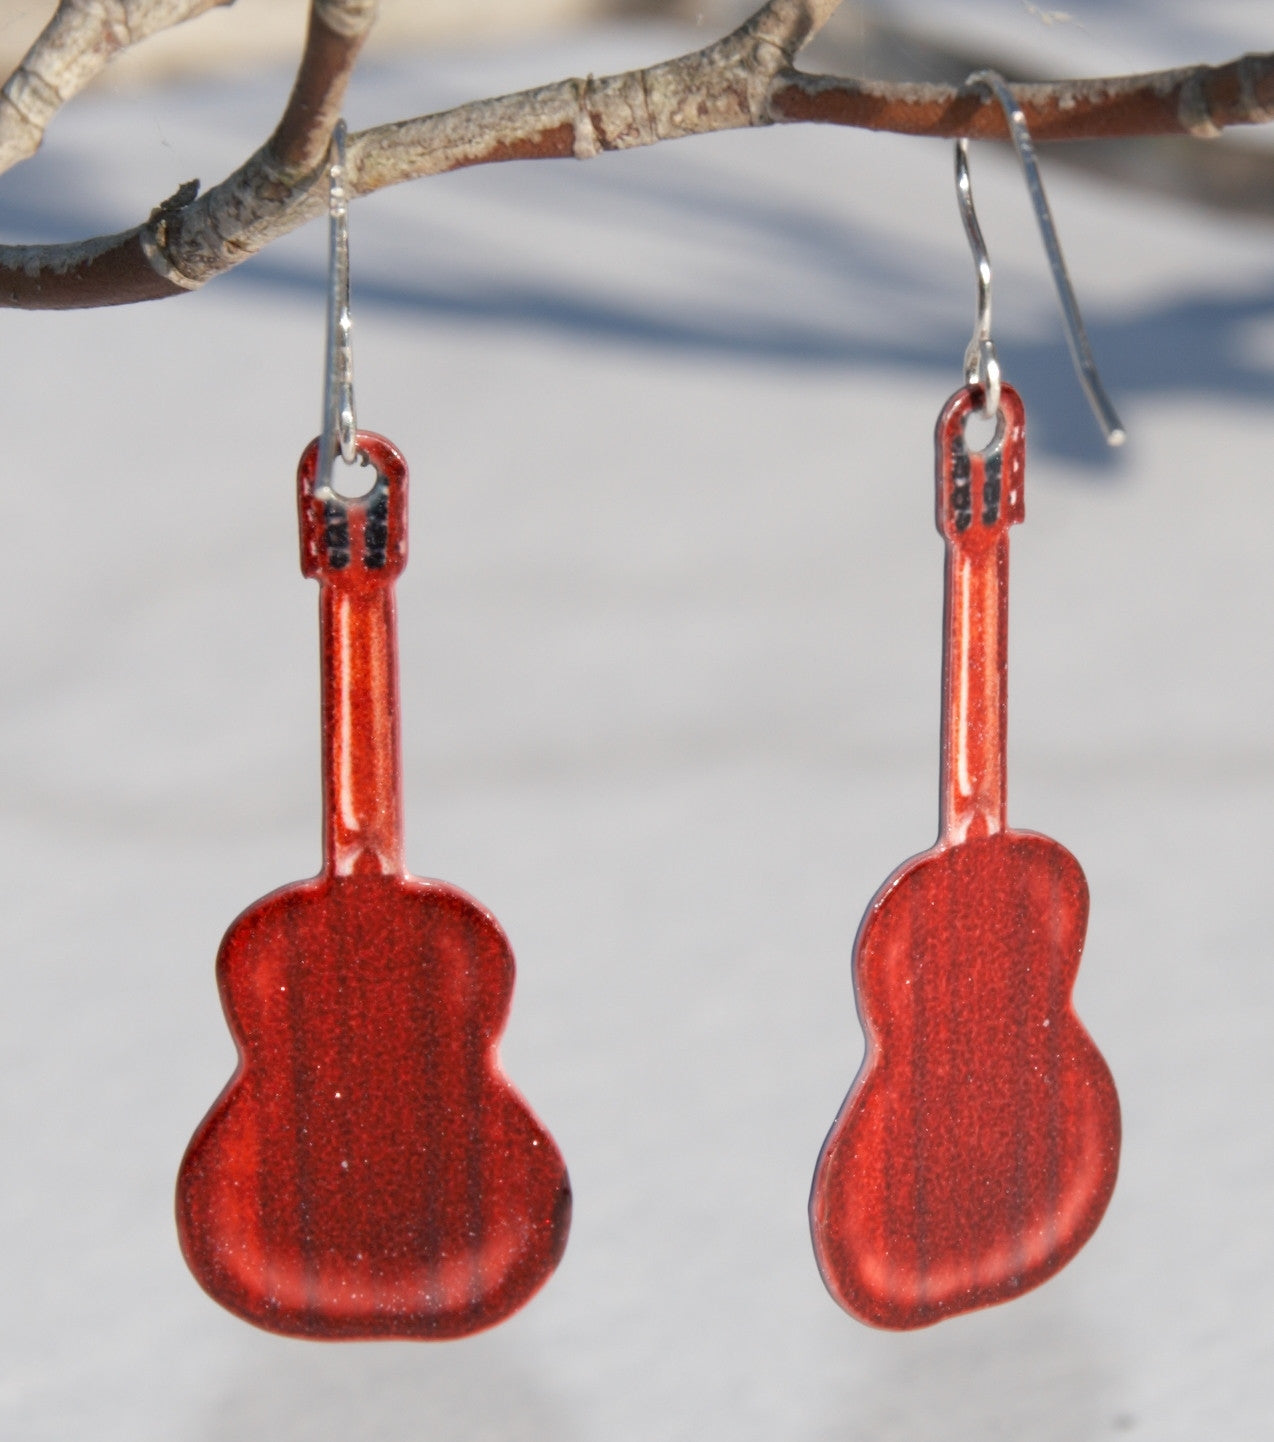 Nashville Guitar Earrings-Downtown Nashville on Acoustic Guitar shaped earrings. Made from a photo we took in 2016. The backs looks like the wood on the back of real guitar. Made in USA by D'ears. Sold exclusively by our shop online or in our retail shop in Smyrna, TN. back view